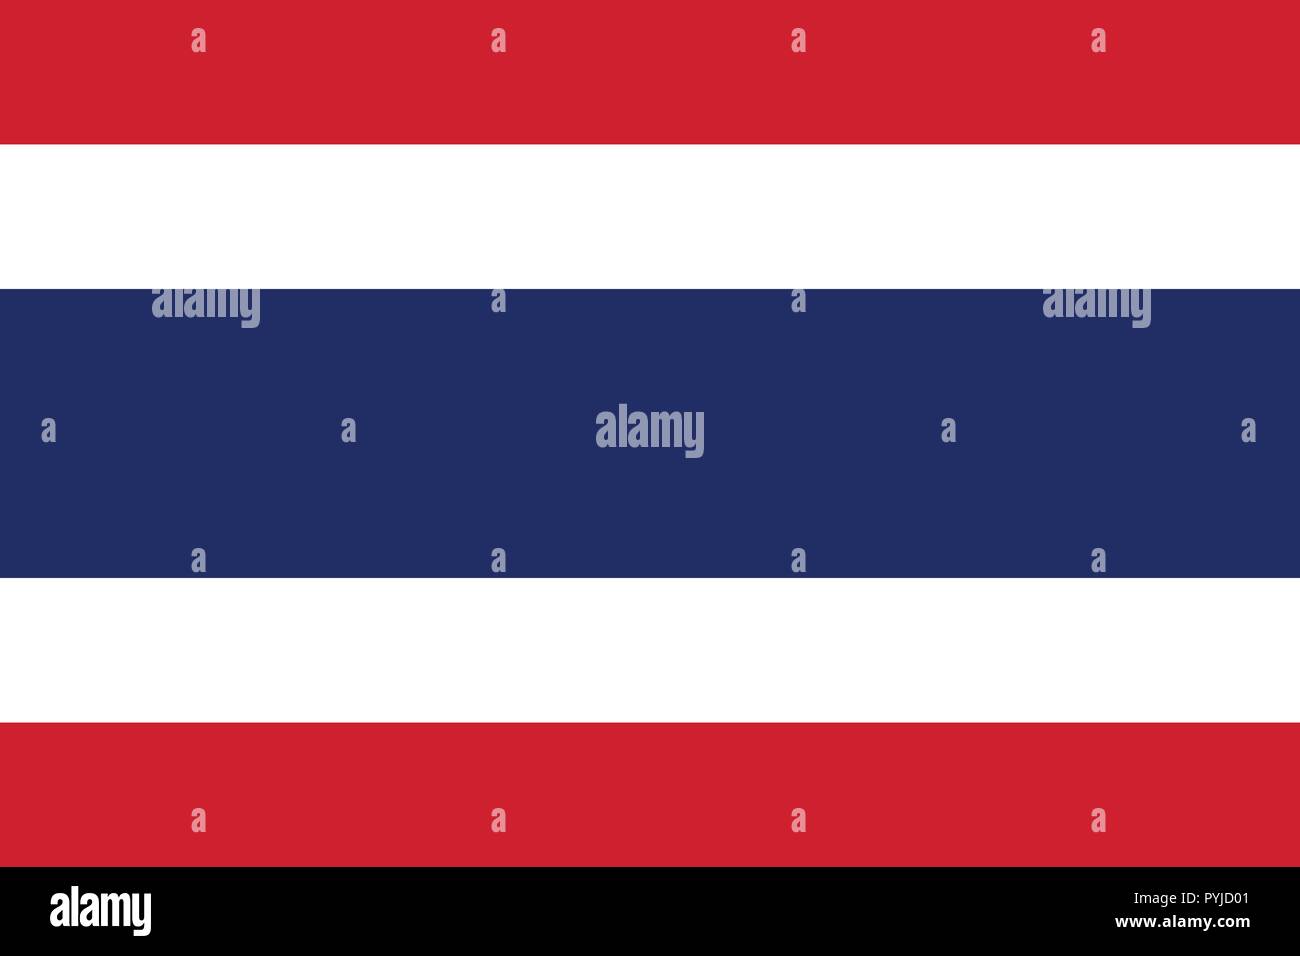 Vector image for Thailand flag. Based on the official and exact Thai flag dimensions (3:2) & colors (186C, White and 280C) Stock Vector